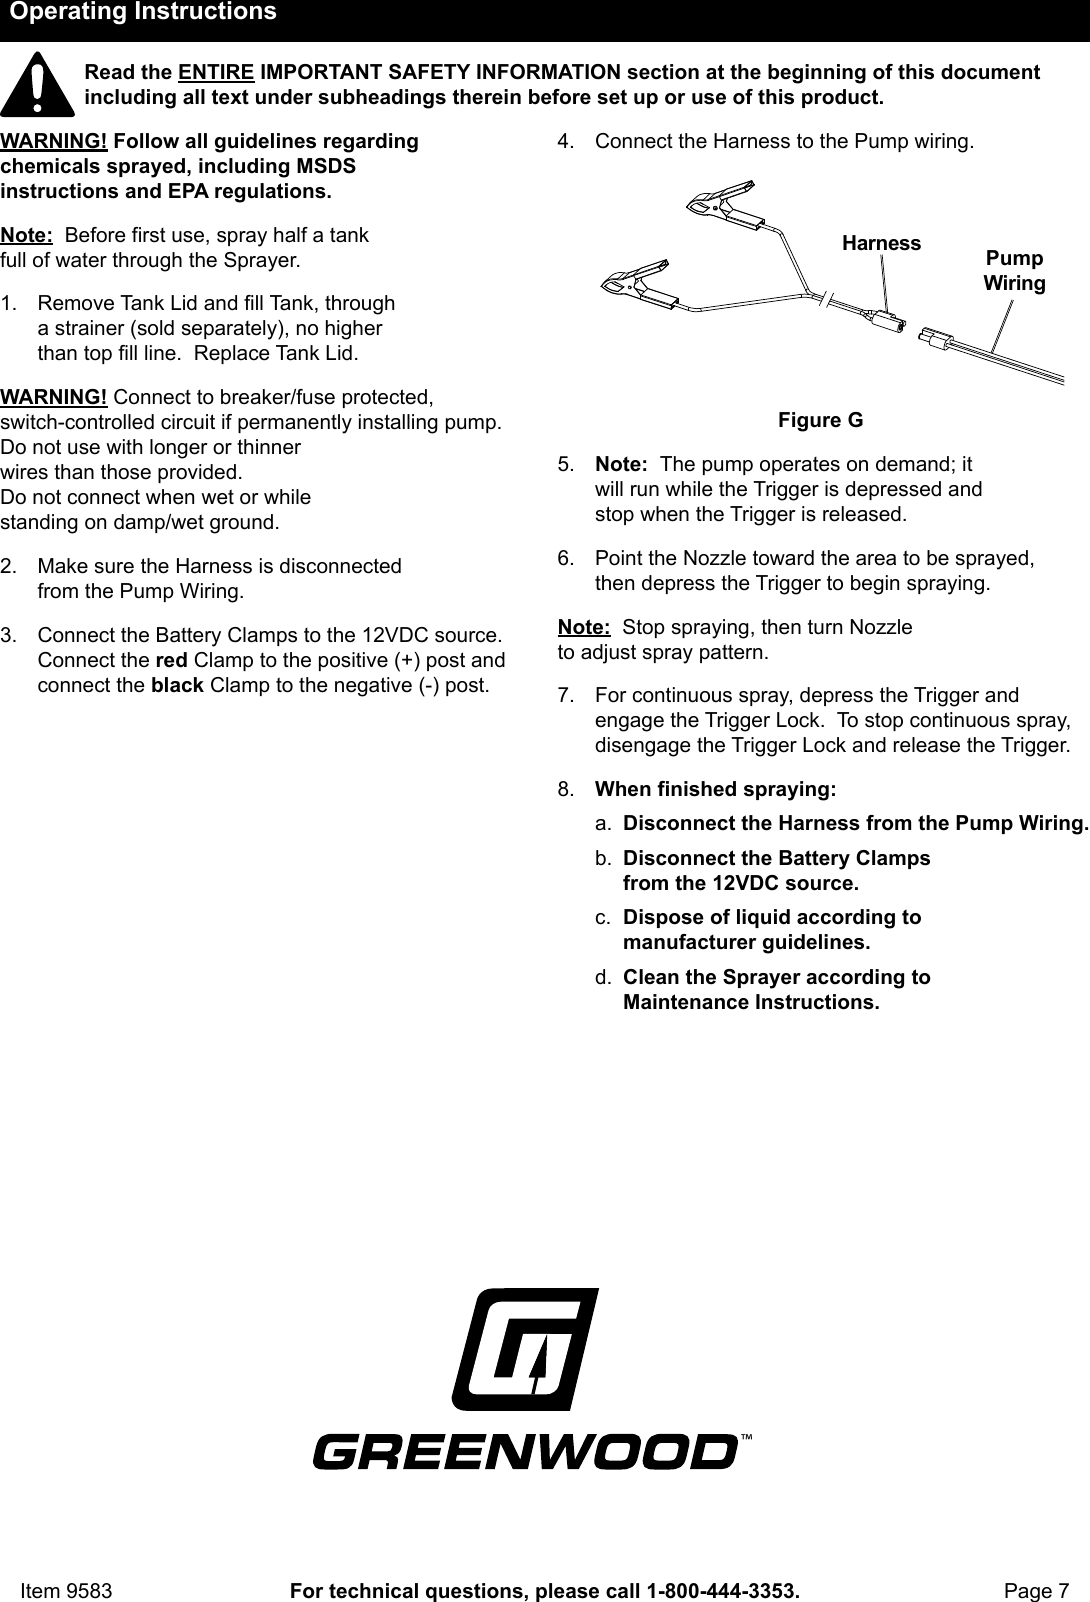 Page 7 of 12 - Harbor-Freight Harbor-Freight-9583-Owner-S-Manual